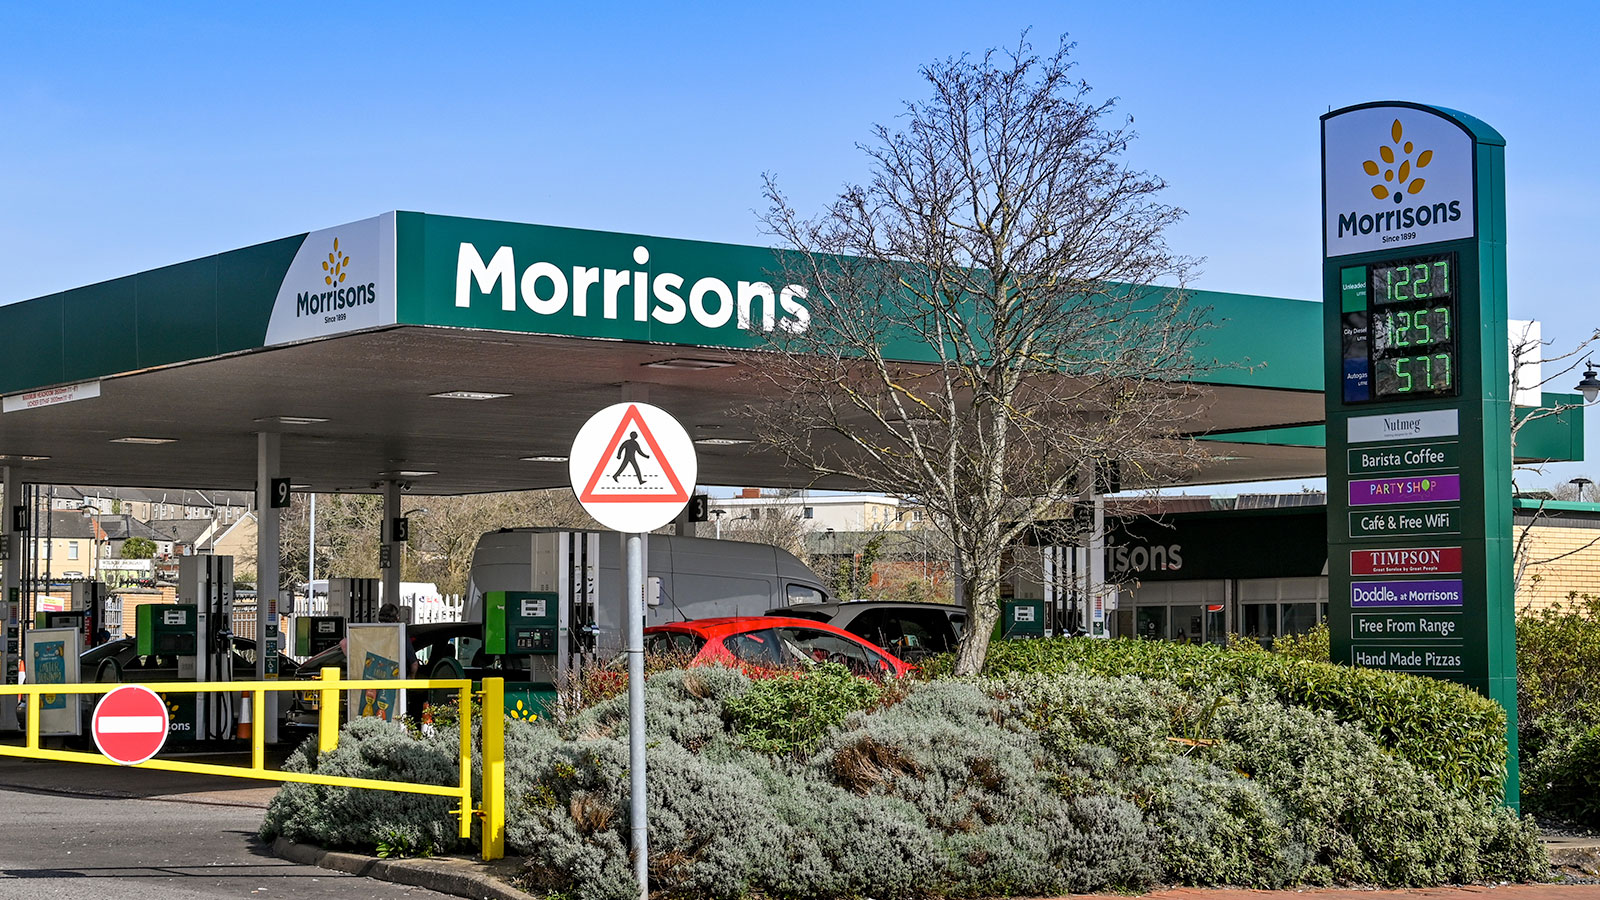 Motor Fuel Group (MFG) wants to massively expand its network of EV chargers, and to do so, it’s acquiring 337 petrol forecourts from supermarket giant Morrisons.